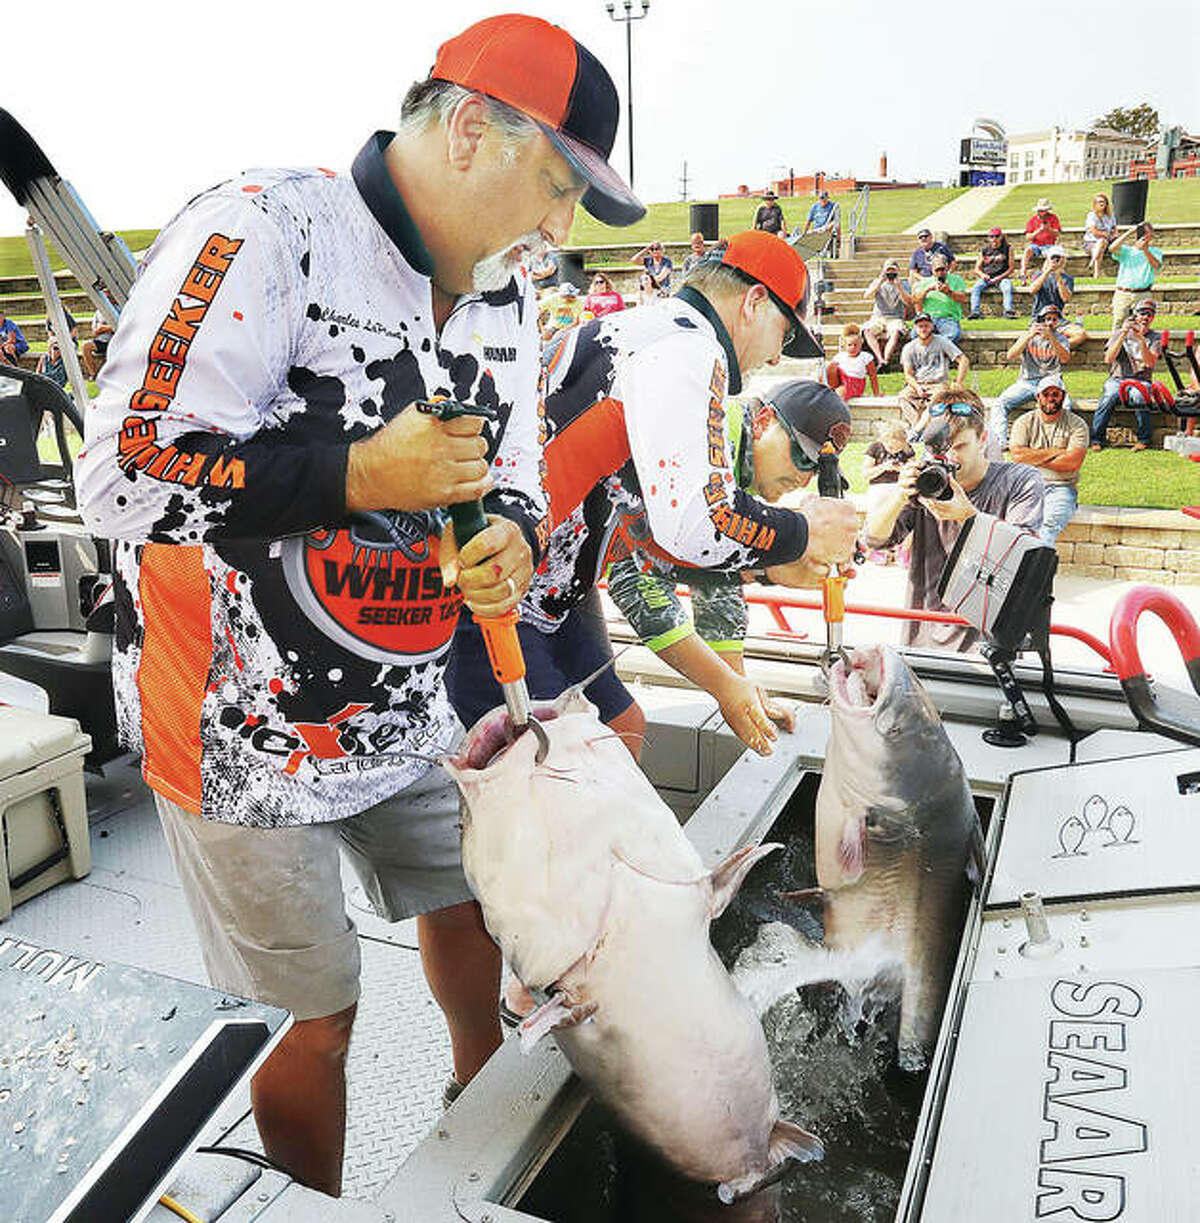 From the left, Charles LaPlant, Mike Davis and Hunter Jones, all from Springfield, Illinois, hoist up their catch Saturday at the 2021 Alton Catfish Classic so it can be weighed. The three were among 100 teams of fisherman competing in this year’s event. The men landed one fish over 67 pounds and had a total weight of more than 129 pounds. The first place prize of $15,000 was won by Justin Neece of Odessa, Missouri, and John Jamison of Wellsville, Kansas with 161.38 pounds. Additional photos are online at thetelegraph.com. - John Badman|The Telegraph